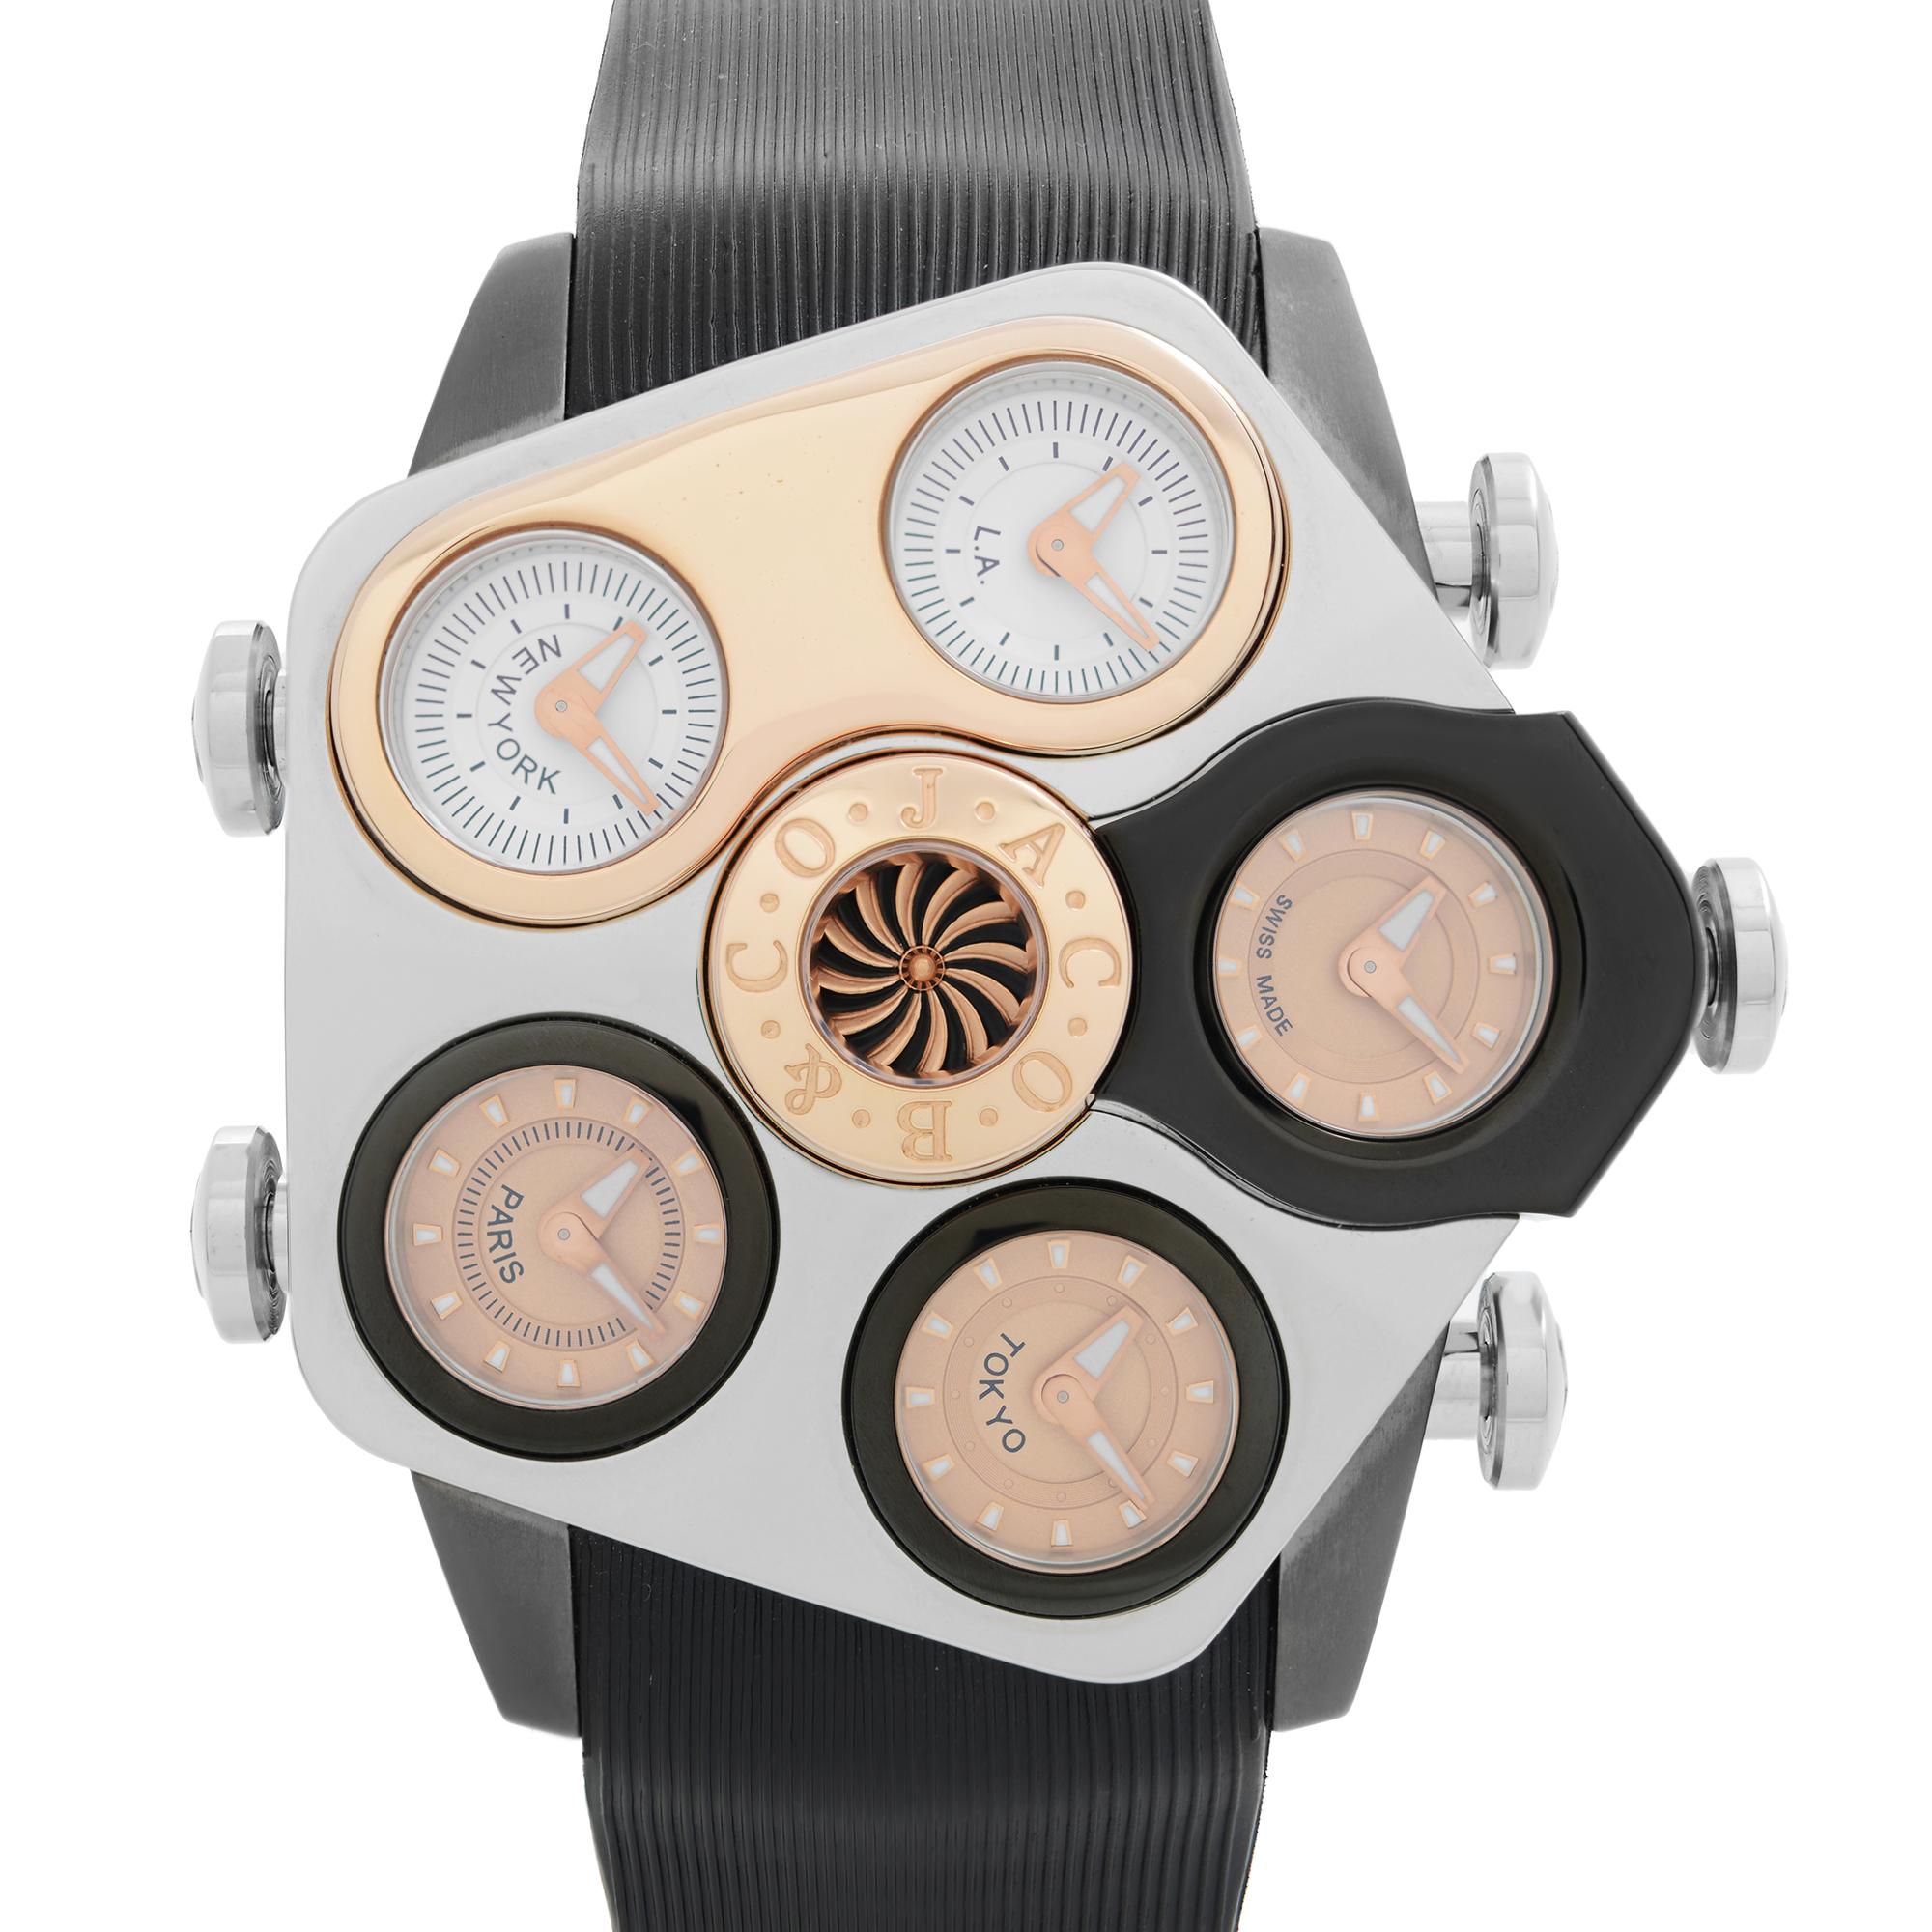 Display Model Jacob & Co Grand 18k Rose Gold-Tone Steel Five Time Zones Quartz Men's Watch GR13-14. This Beautiful Timepiece Features: Stainless Steel Case with Titanium Lugs and Black Rubber Band, 5 Time Zones, Three Bronze Colored Dials with Fixed